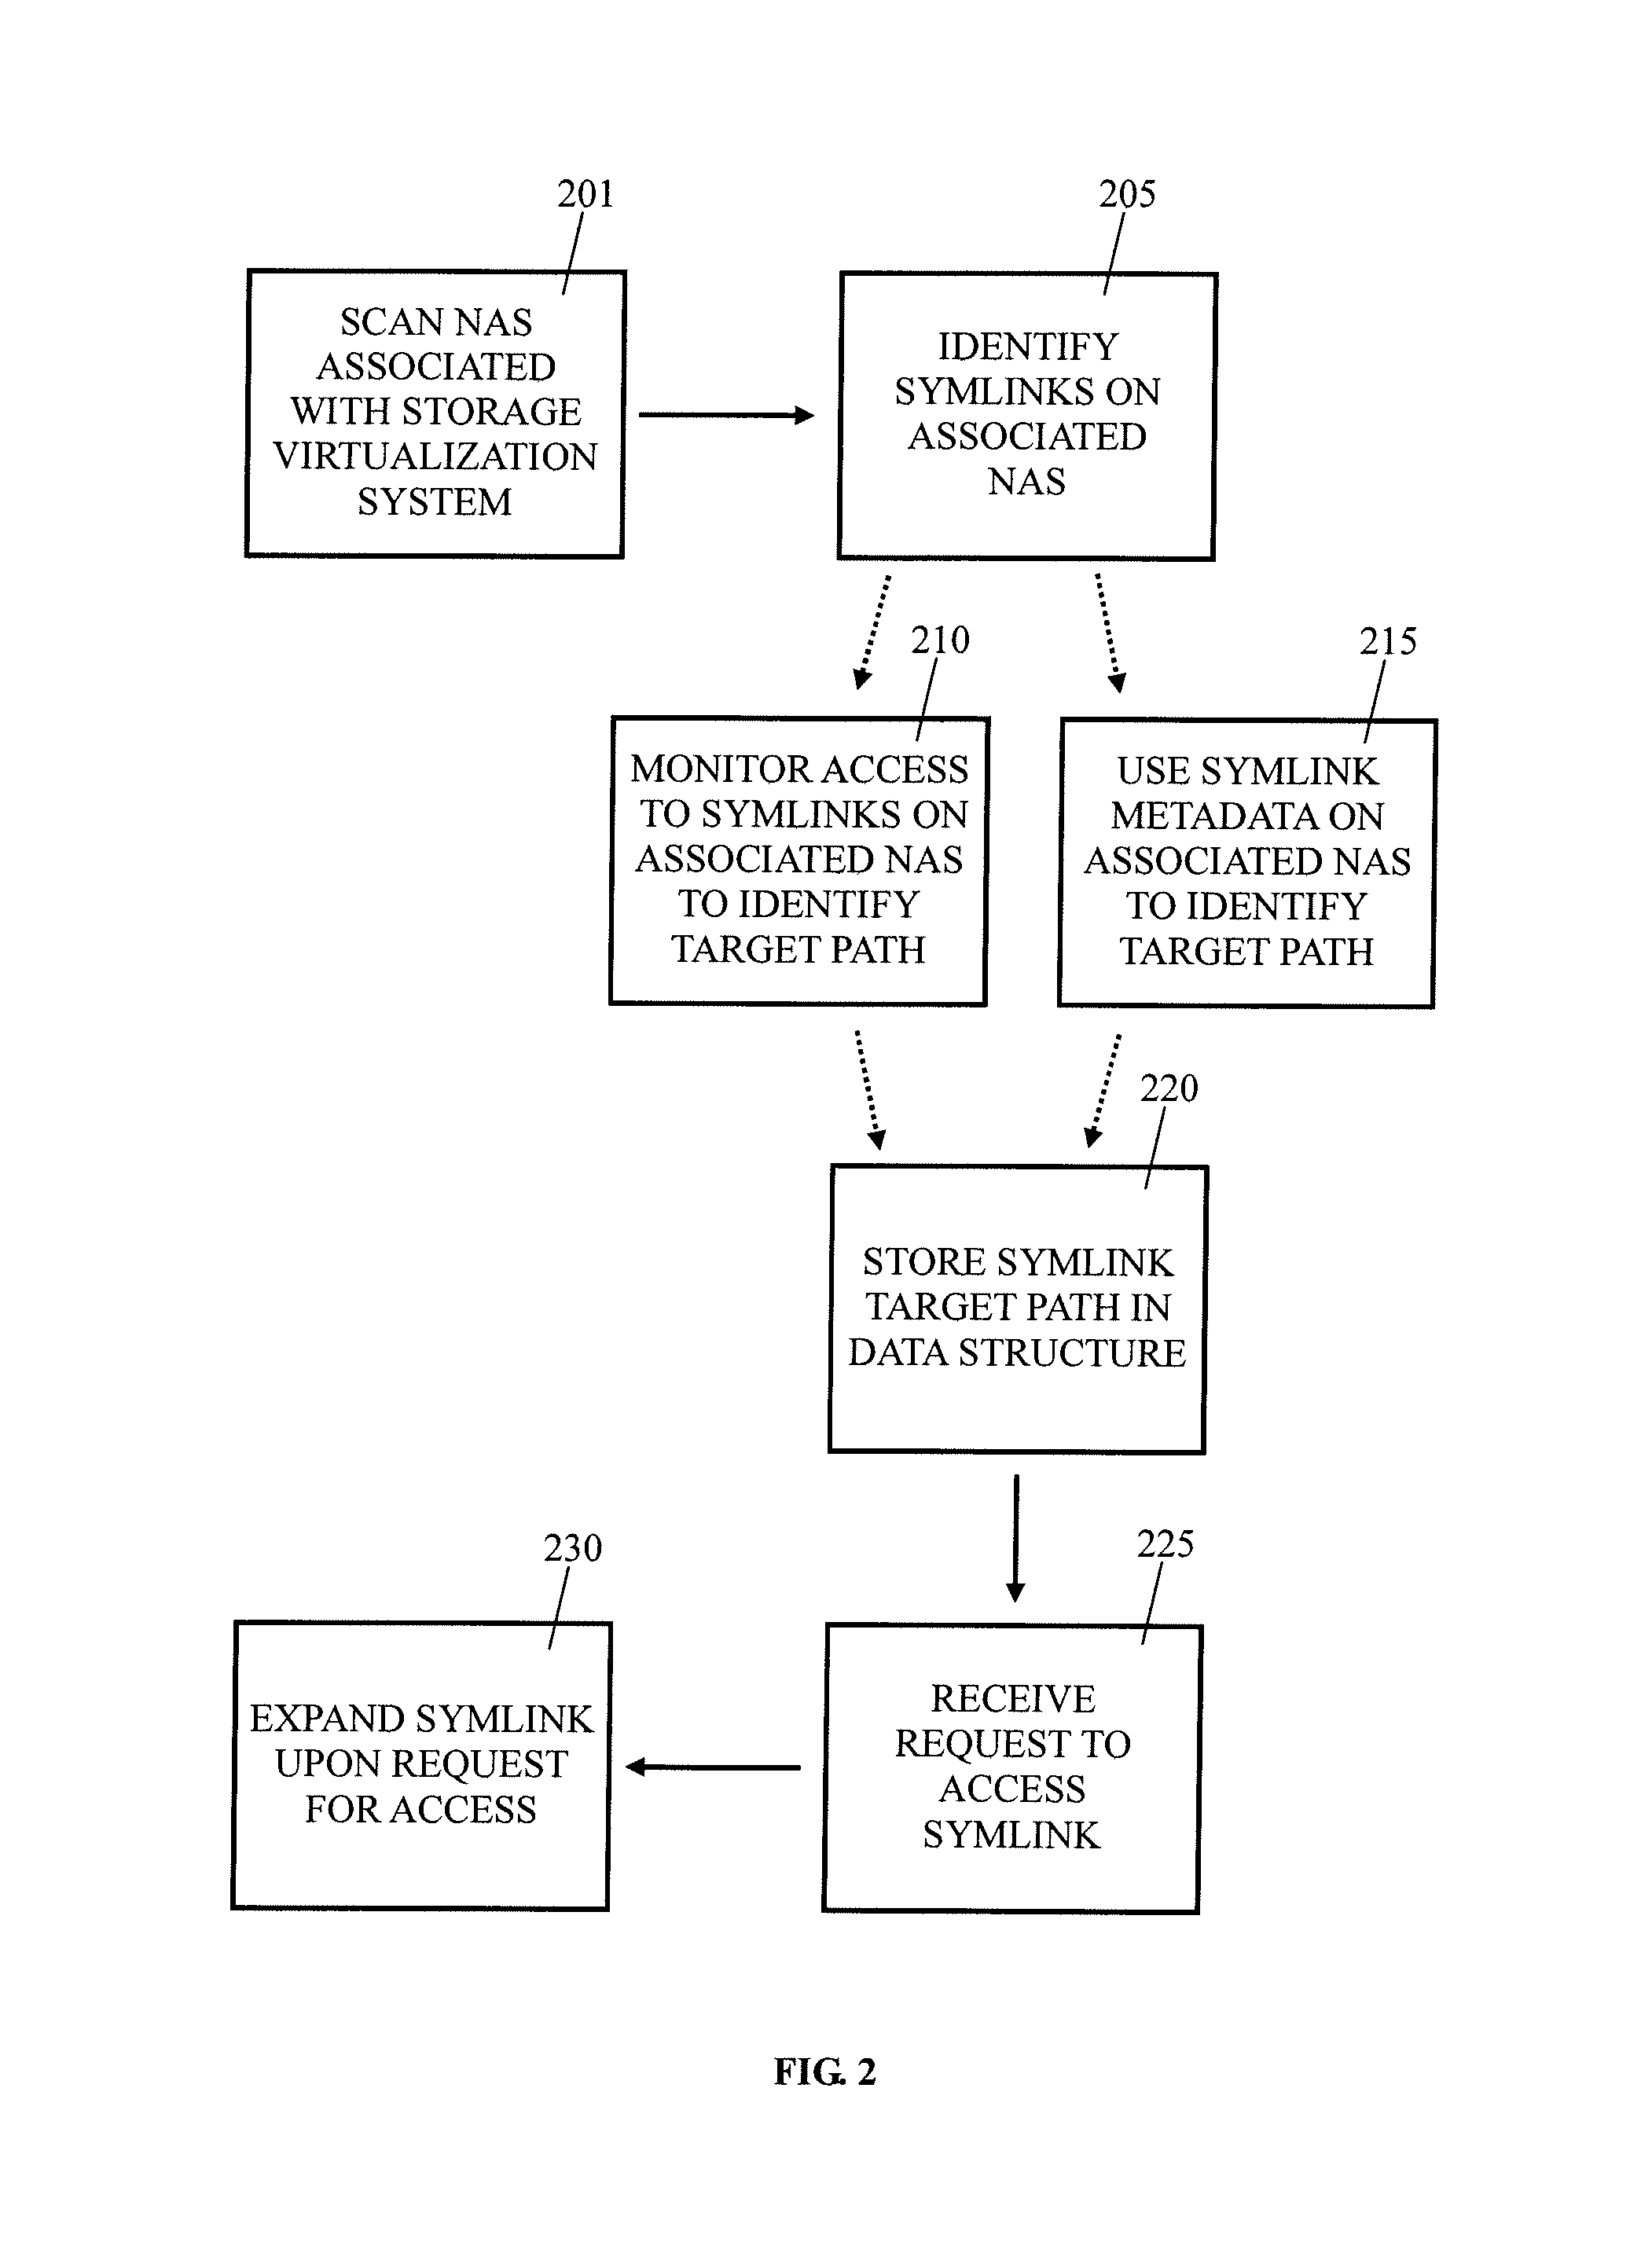 System and method for preserving symbolic links by a storage virtualization system